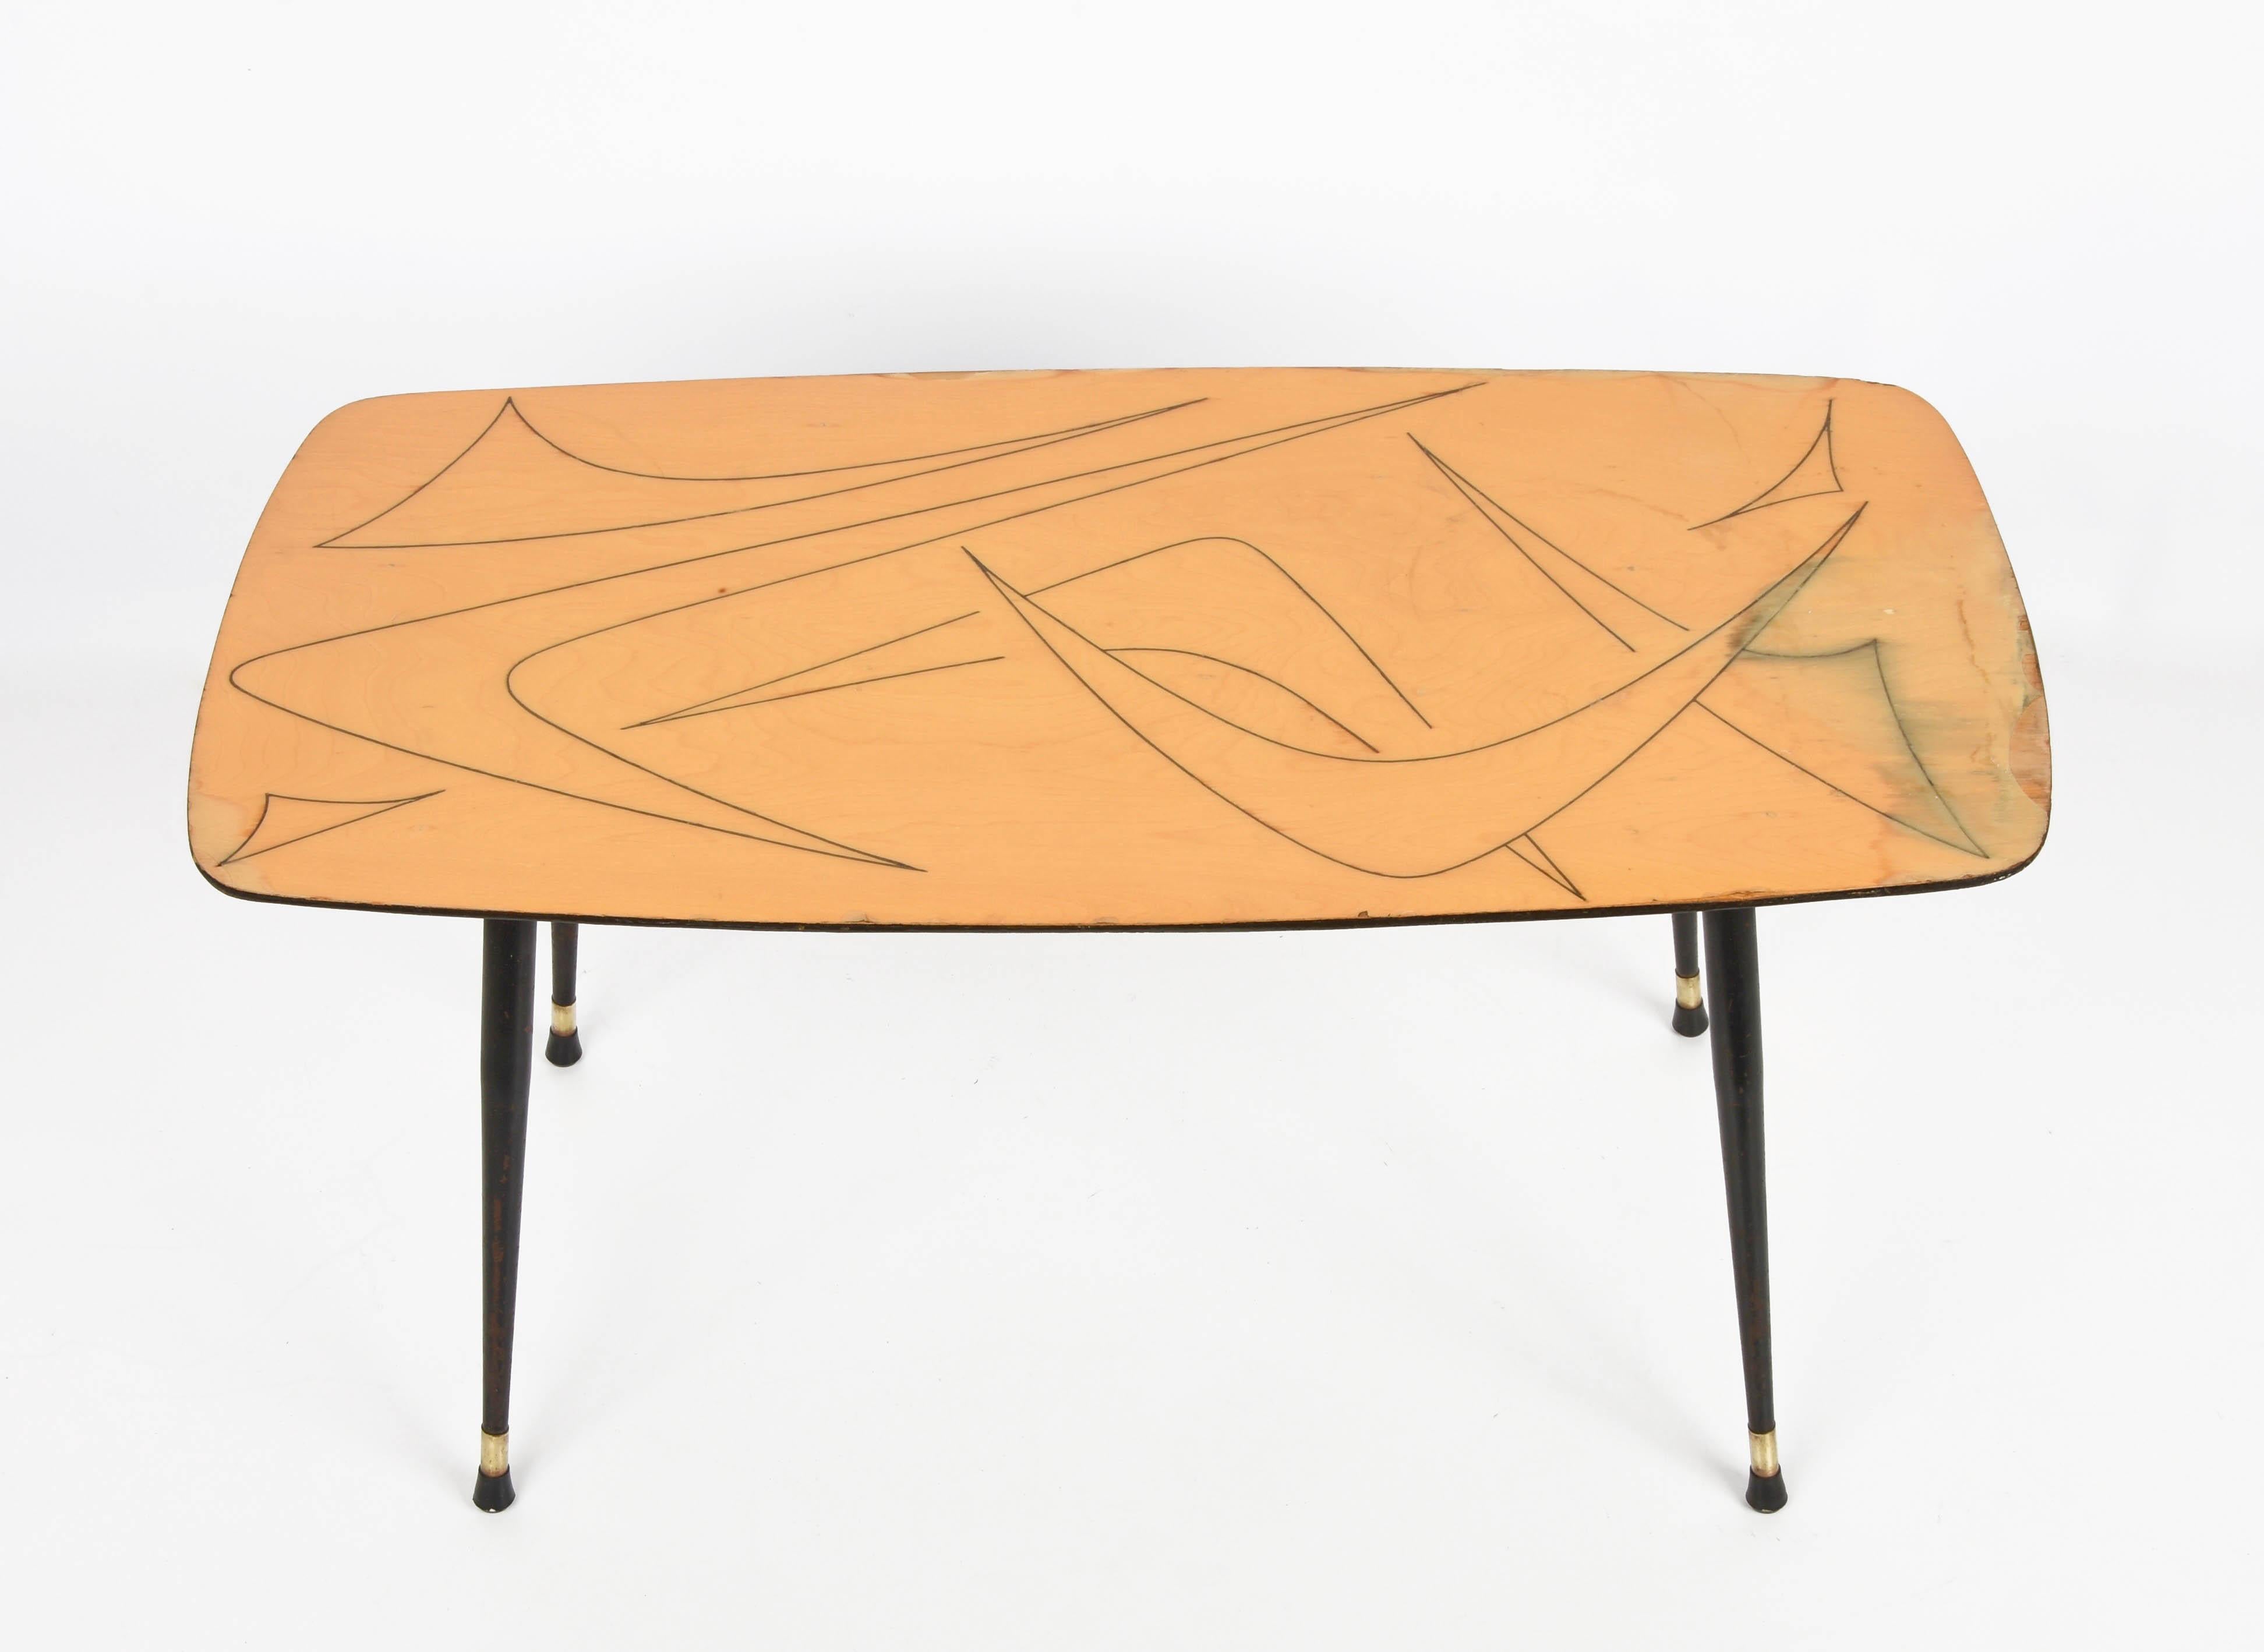 Midcentury Italian Painted Wood, Brass and Black Metal Coffee Table, 1950s For Sale 5